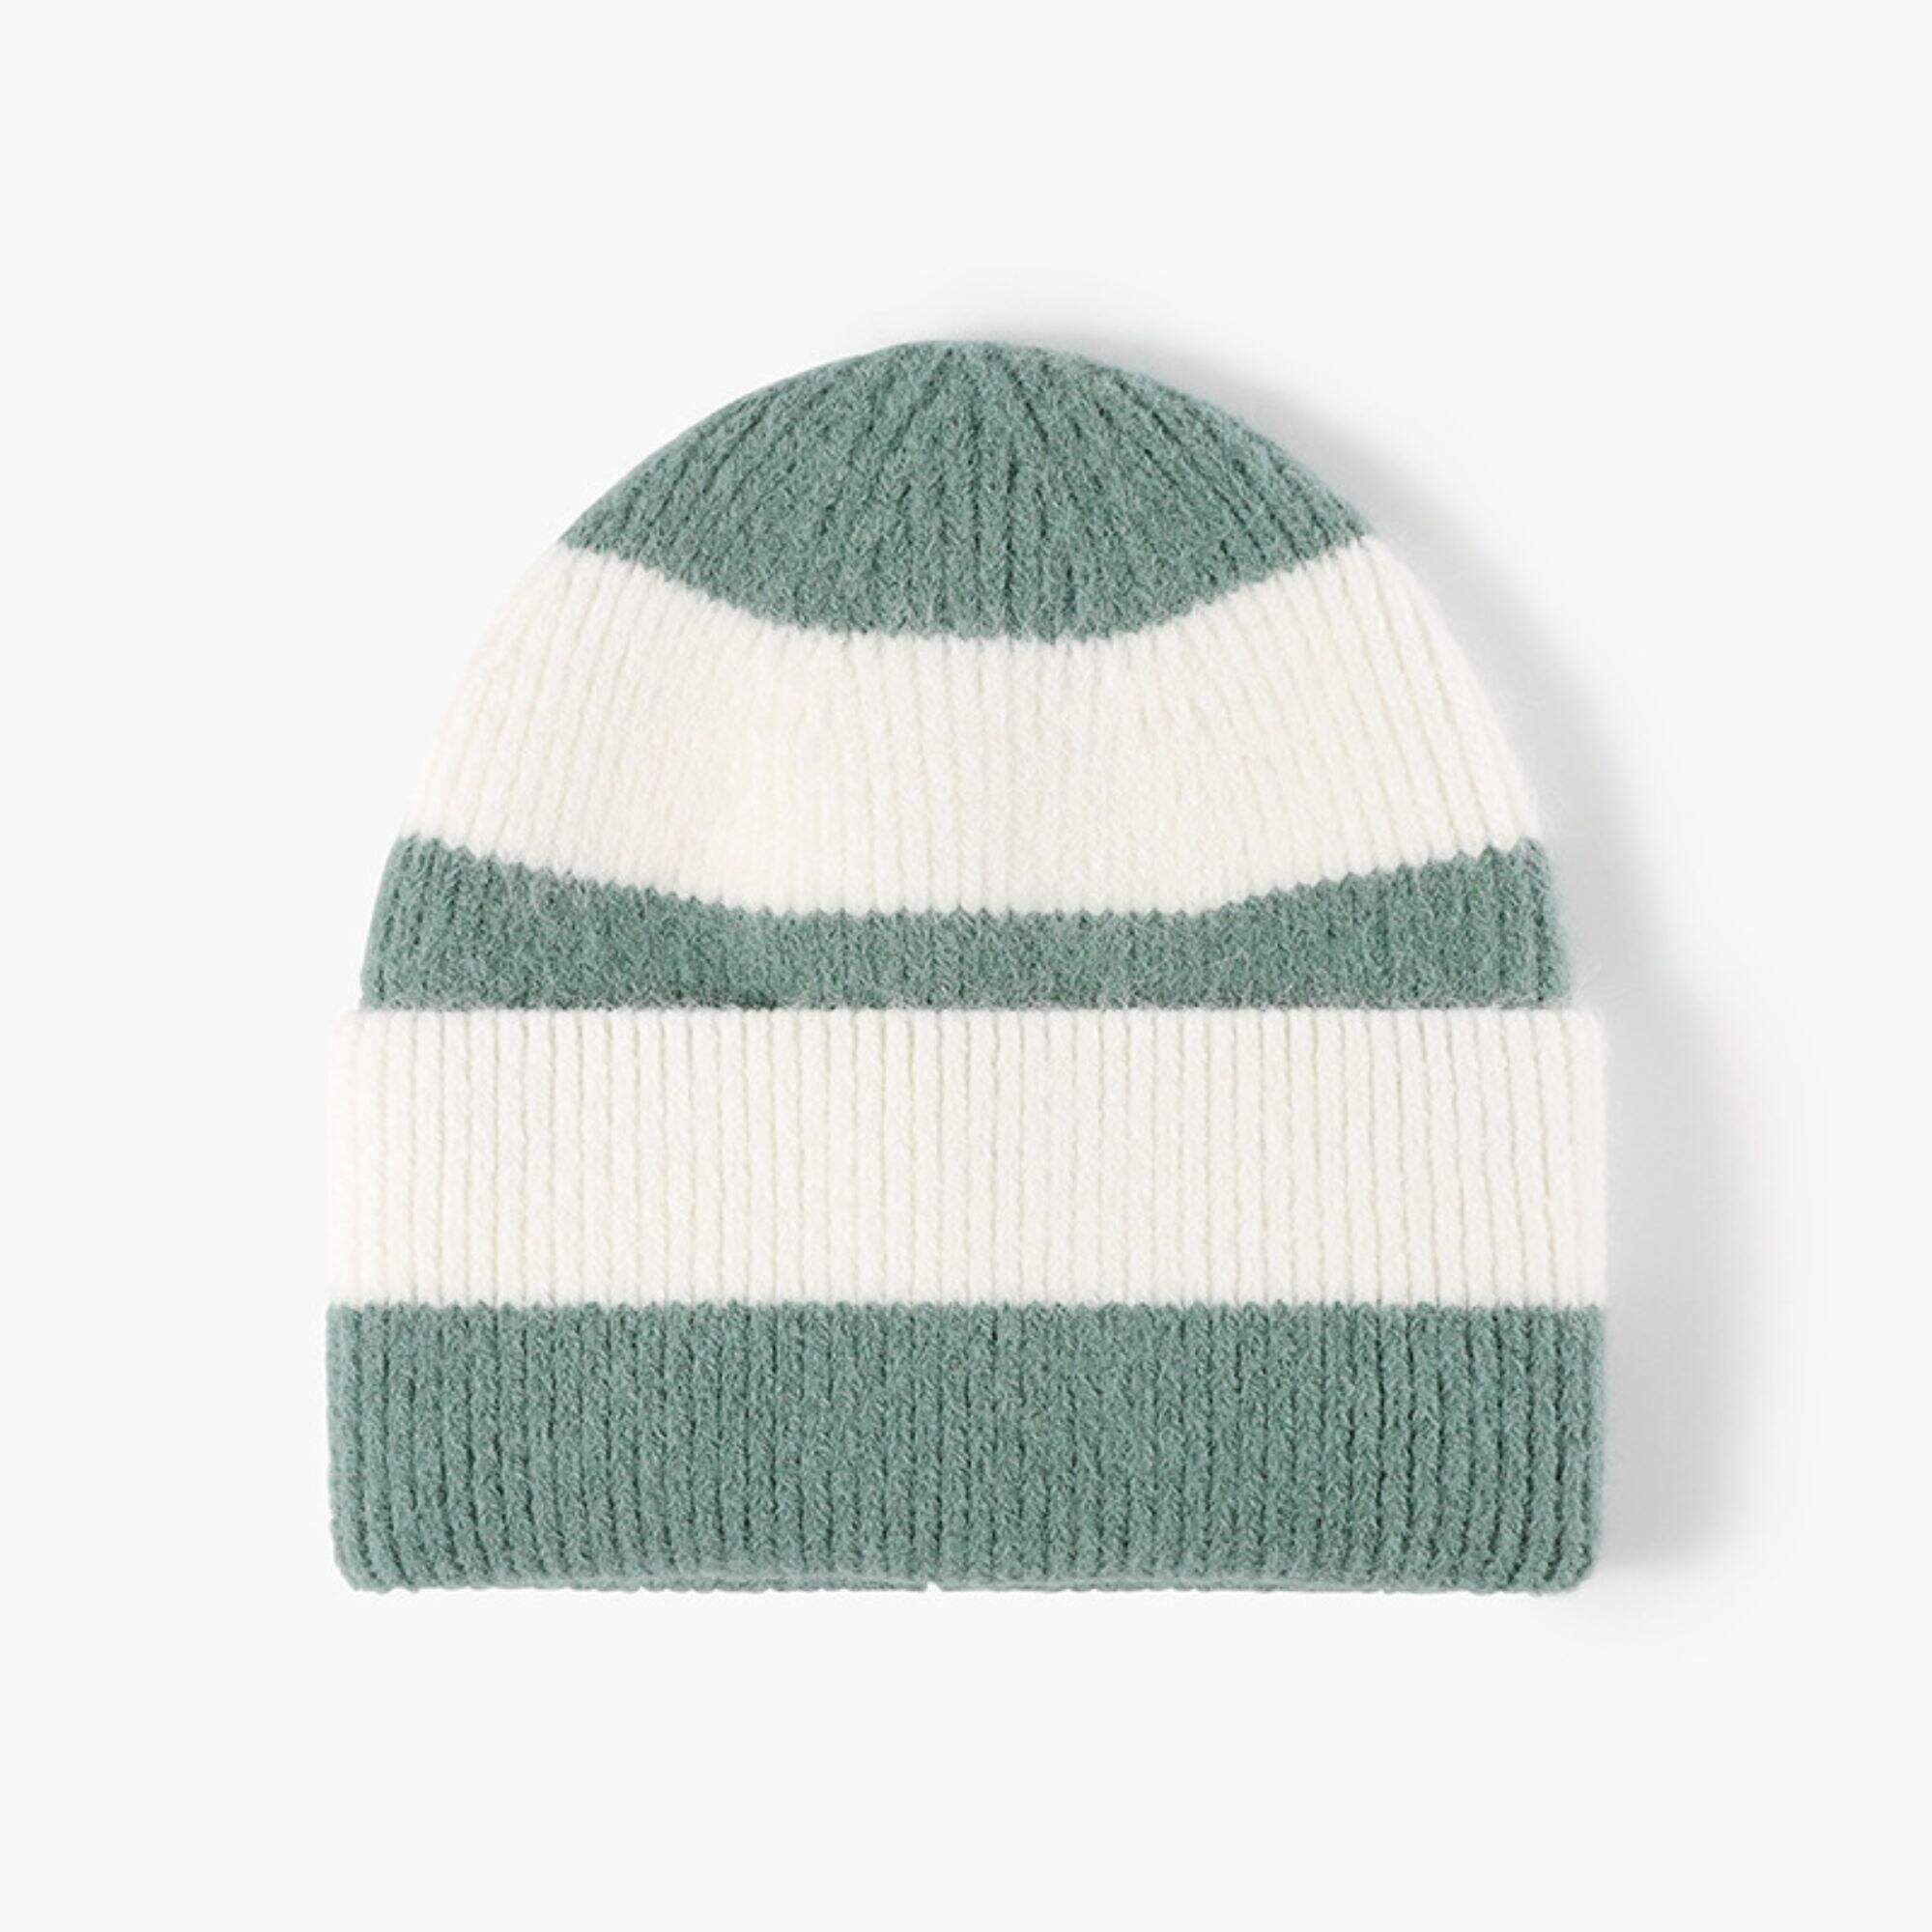 Striped, color-coded beanie